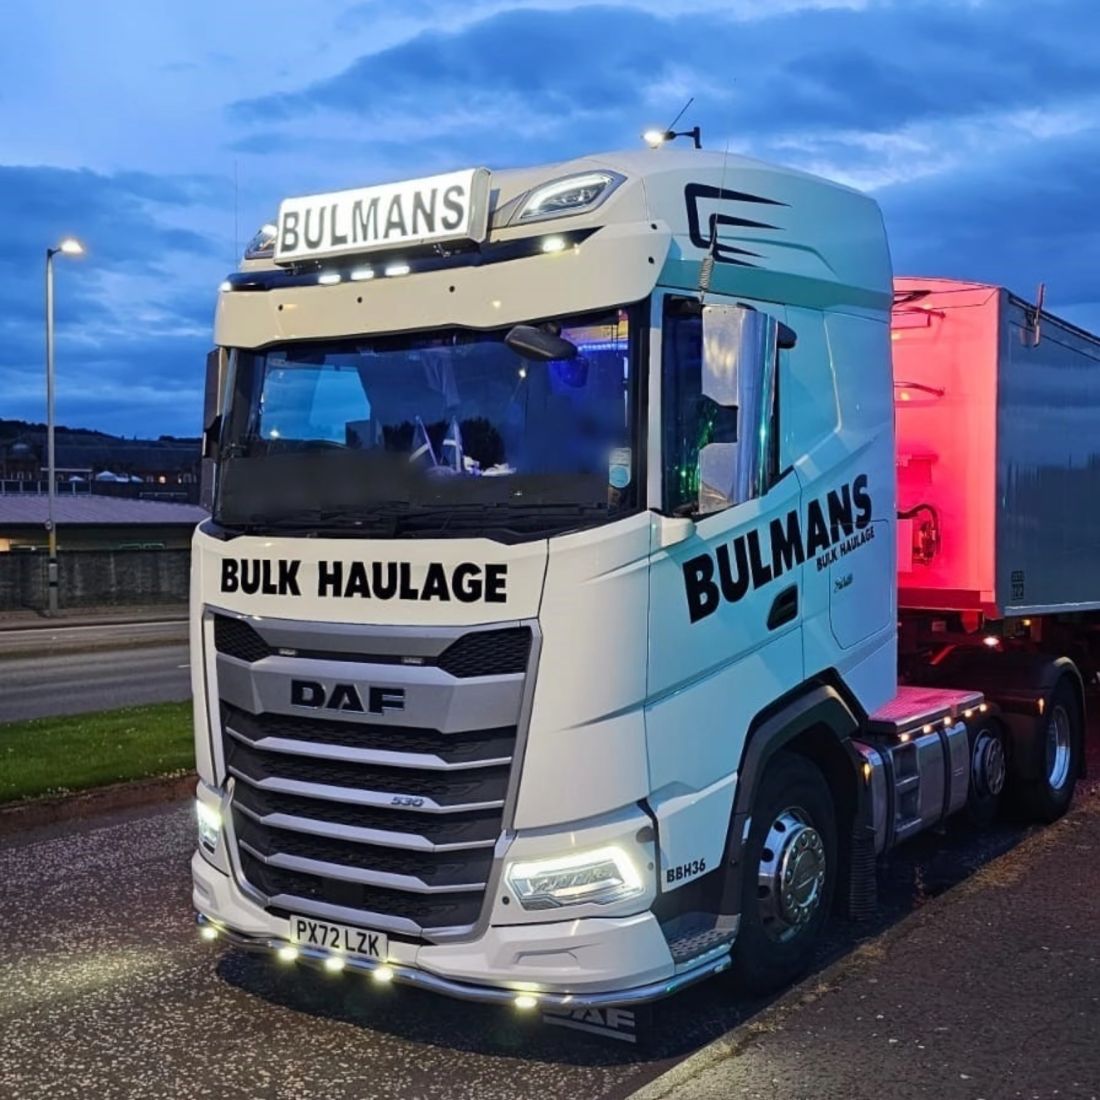 A Bulmans Bulk Haulage DAF Truck parked on the side of the road at dusk, with a dark blue, cloudy sky overhead and street lights lighting the truck.